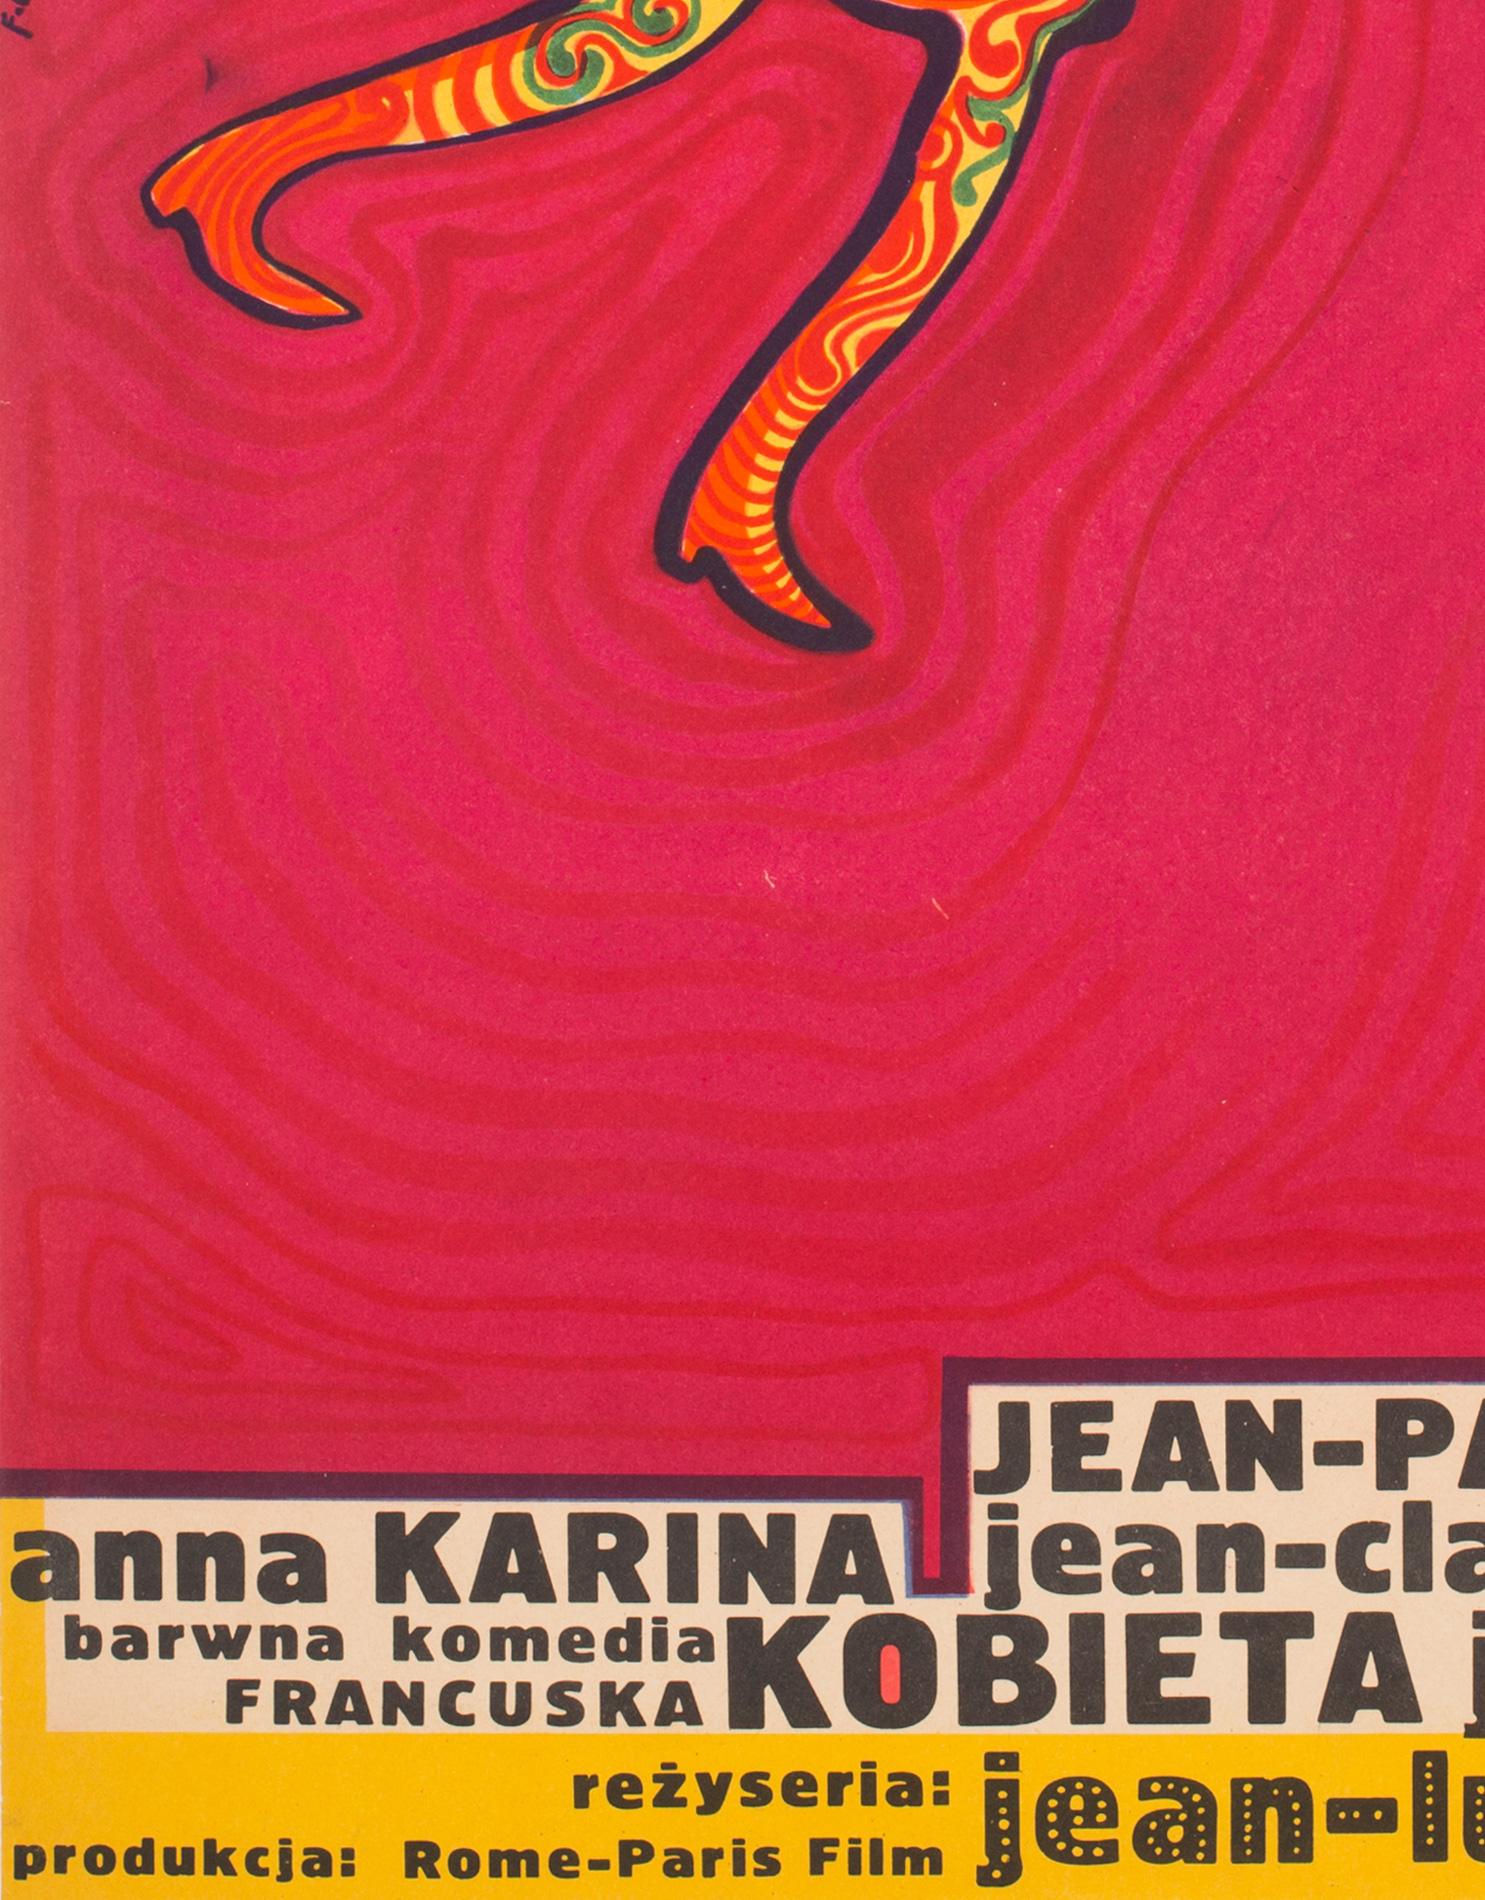 Wonderful, rare polish film poster for Jean-Luc Godard's 1960s rom com Une femme est une femme (aka A Woman Is a Woman).

This vintage movie poster is sized 23 1/4 x 33 1/4 inches.